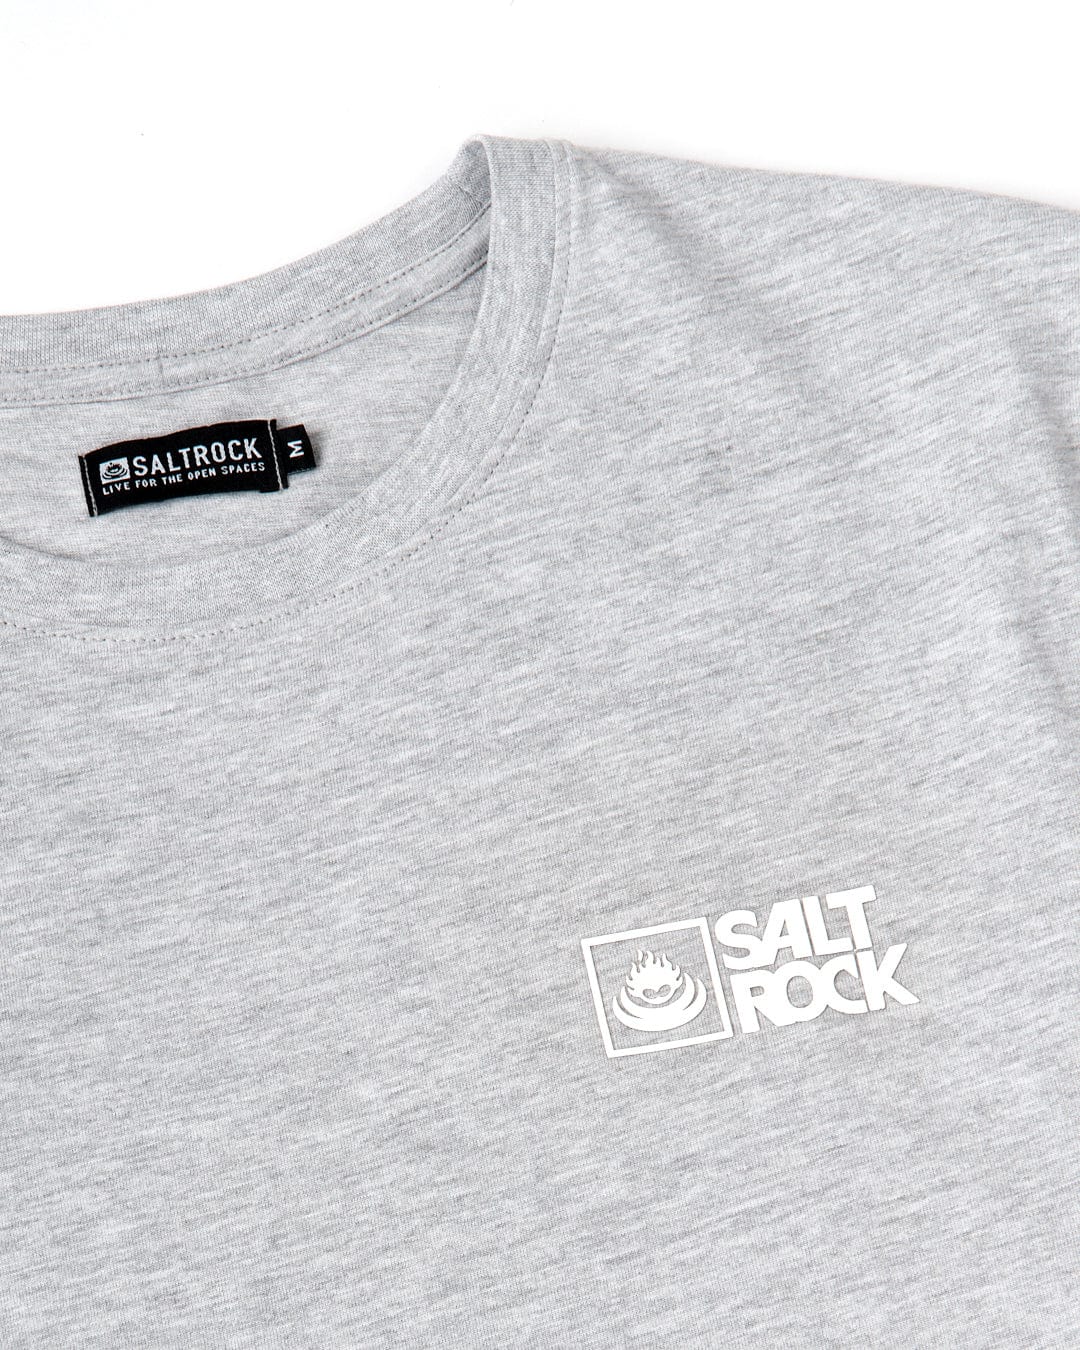 Gray Saltrock Original t-shirt with the Saltrock logo on the chest and a label indicating the Saltrock branding at the back of the neckline.